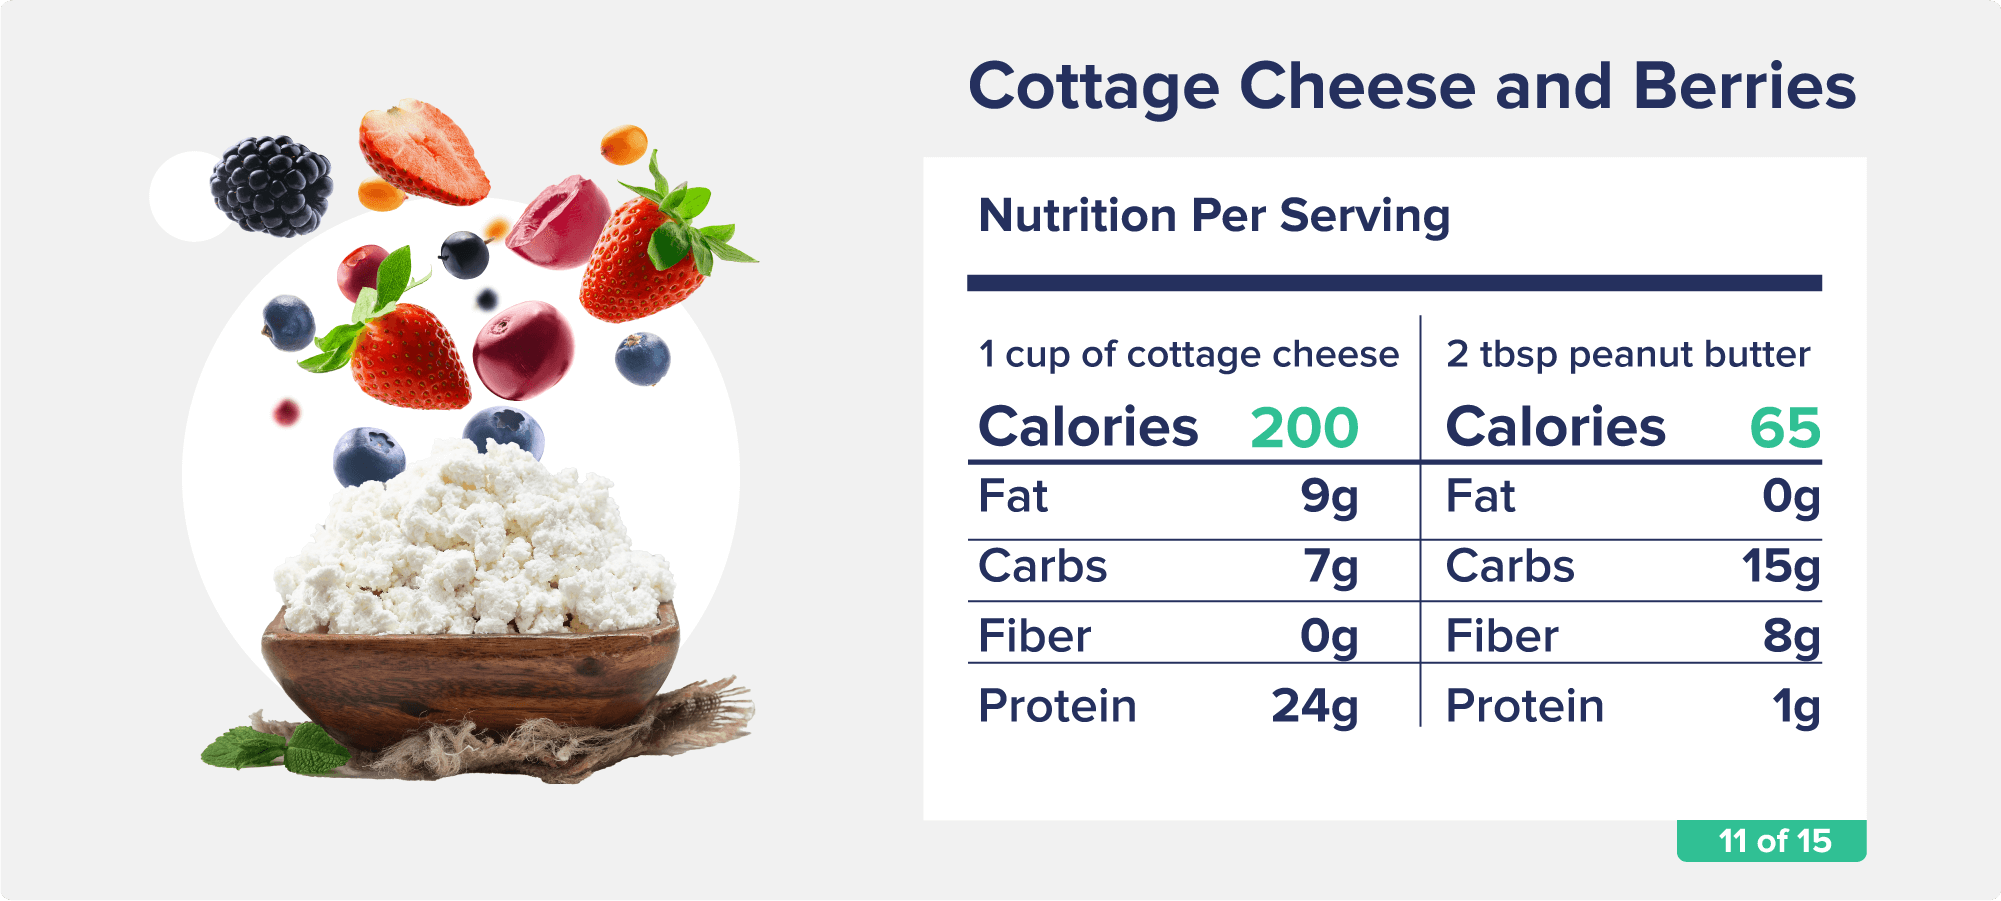 A bowl of cottage cheese with assorted berries hanging in the air above it, along with accompanying nutrition facts like calories, fat, and protein.